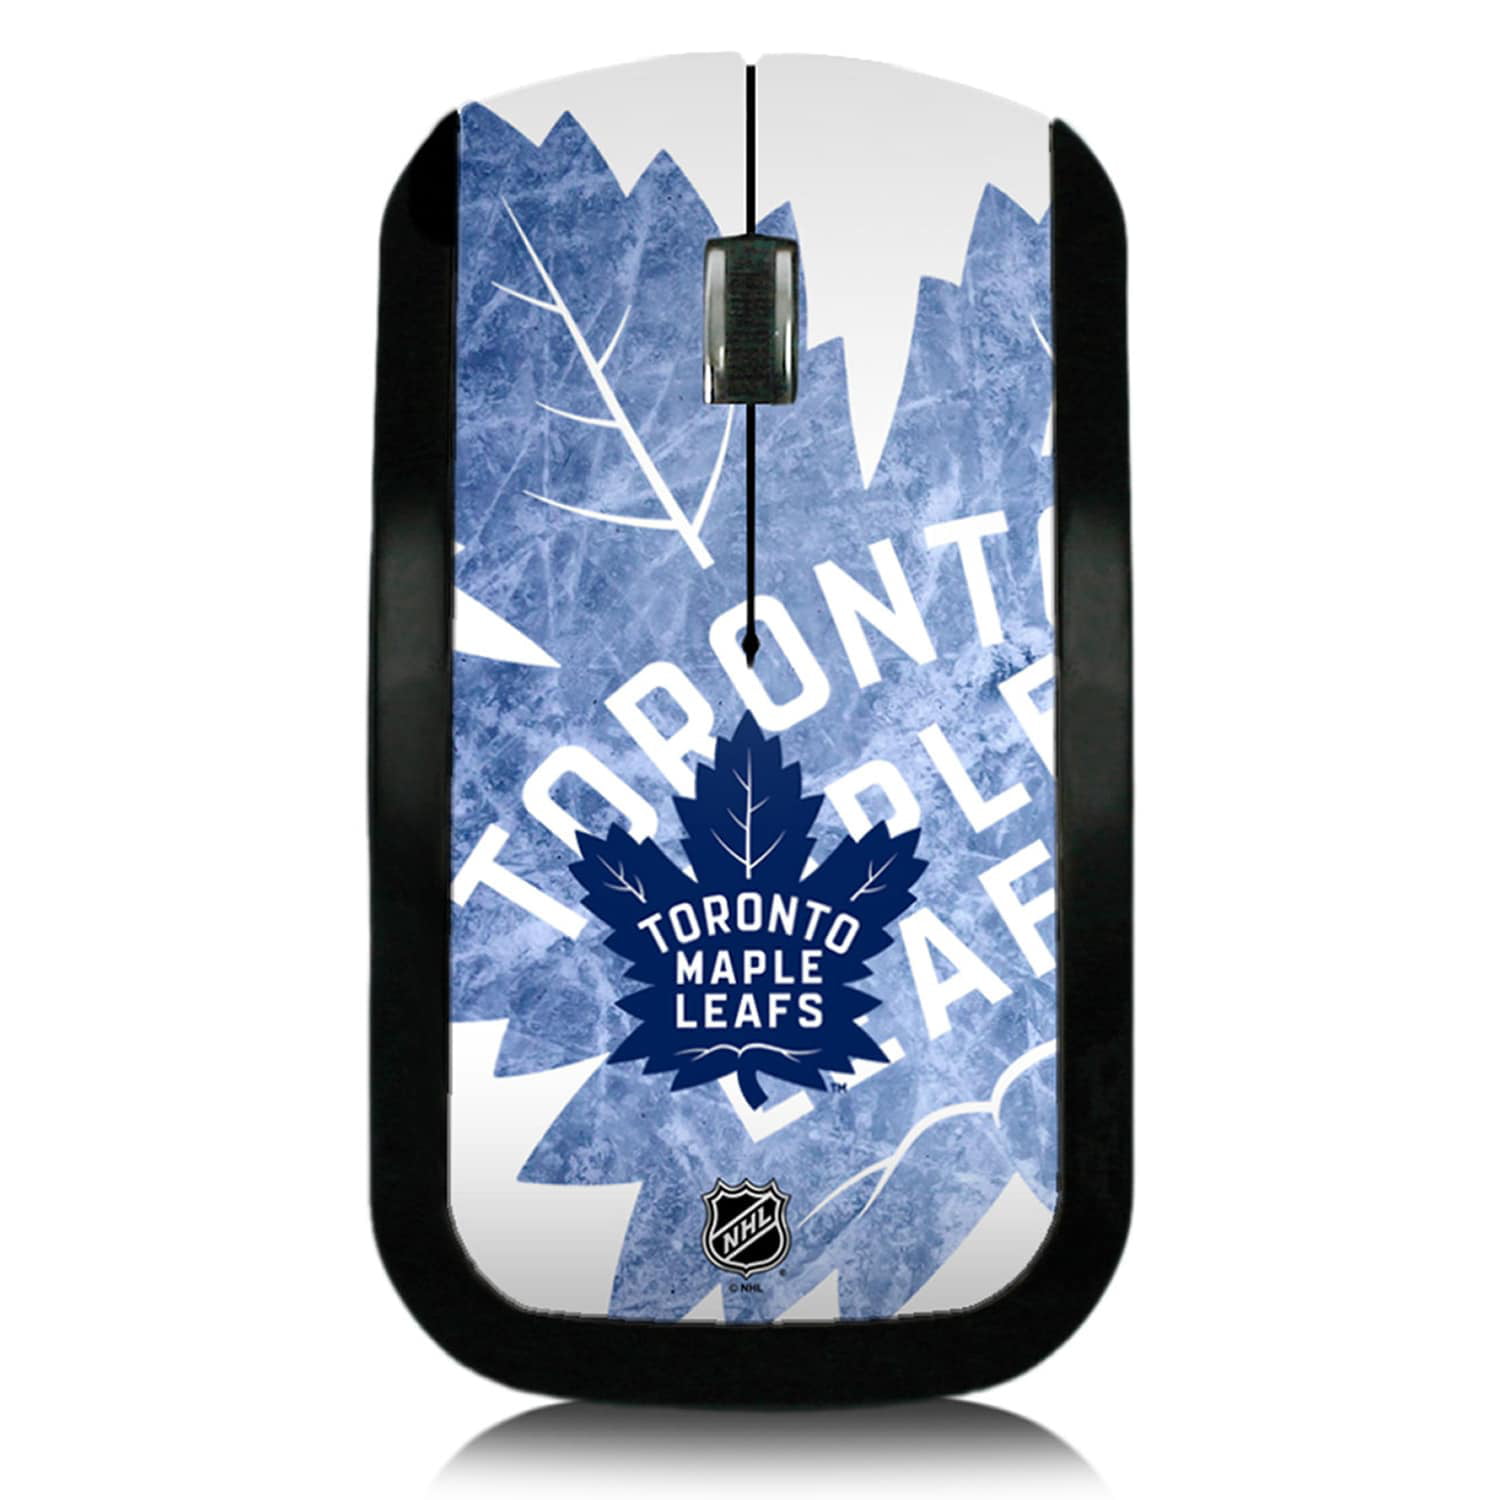 Toronto Maple Leafs Mouse Mat Pad Computer Notebook Laptop Mice 